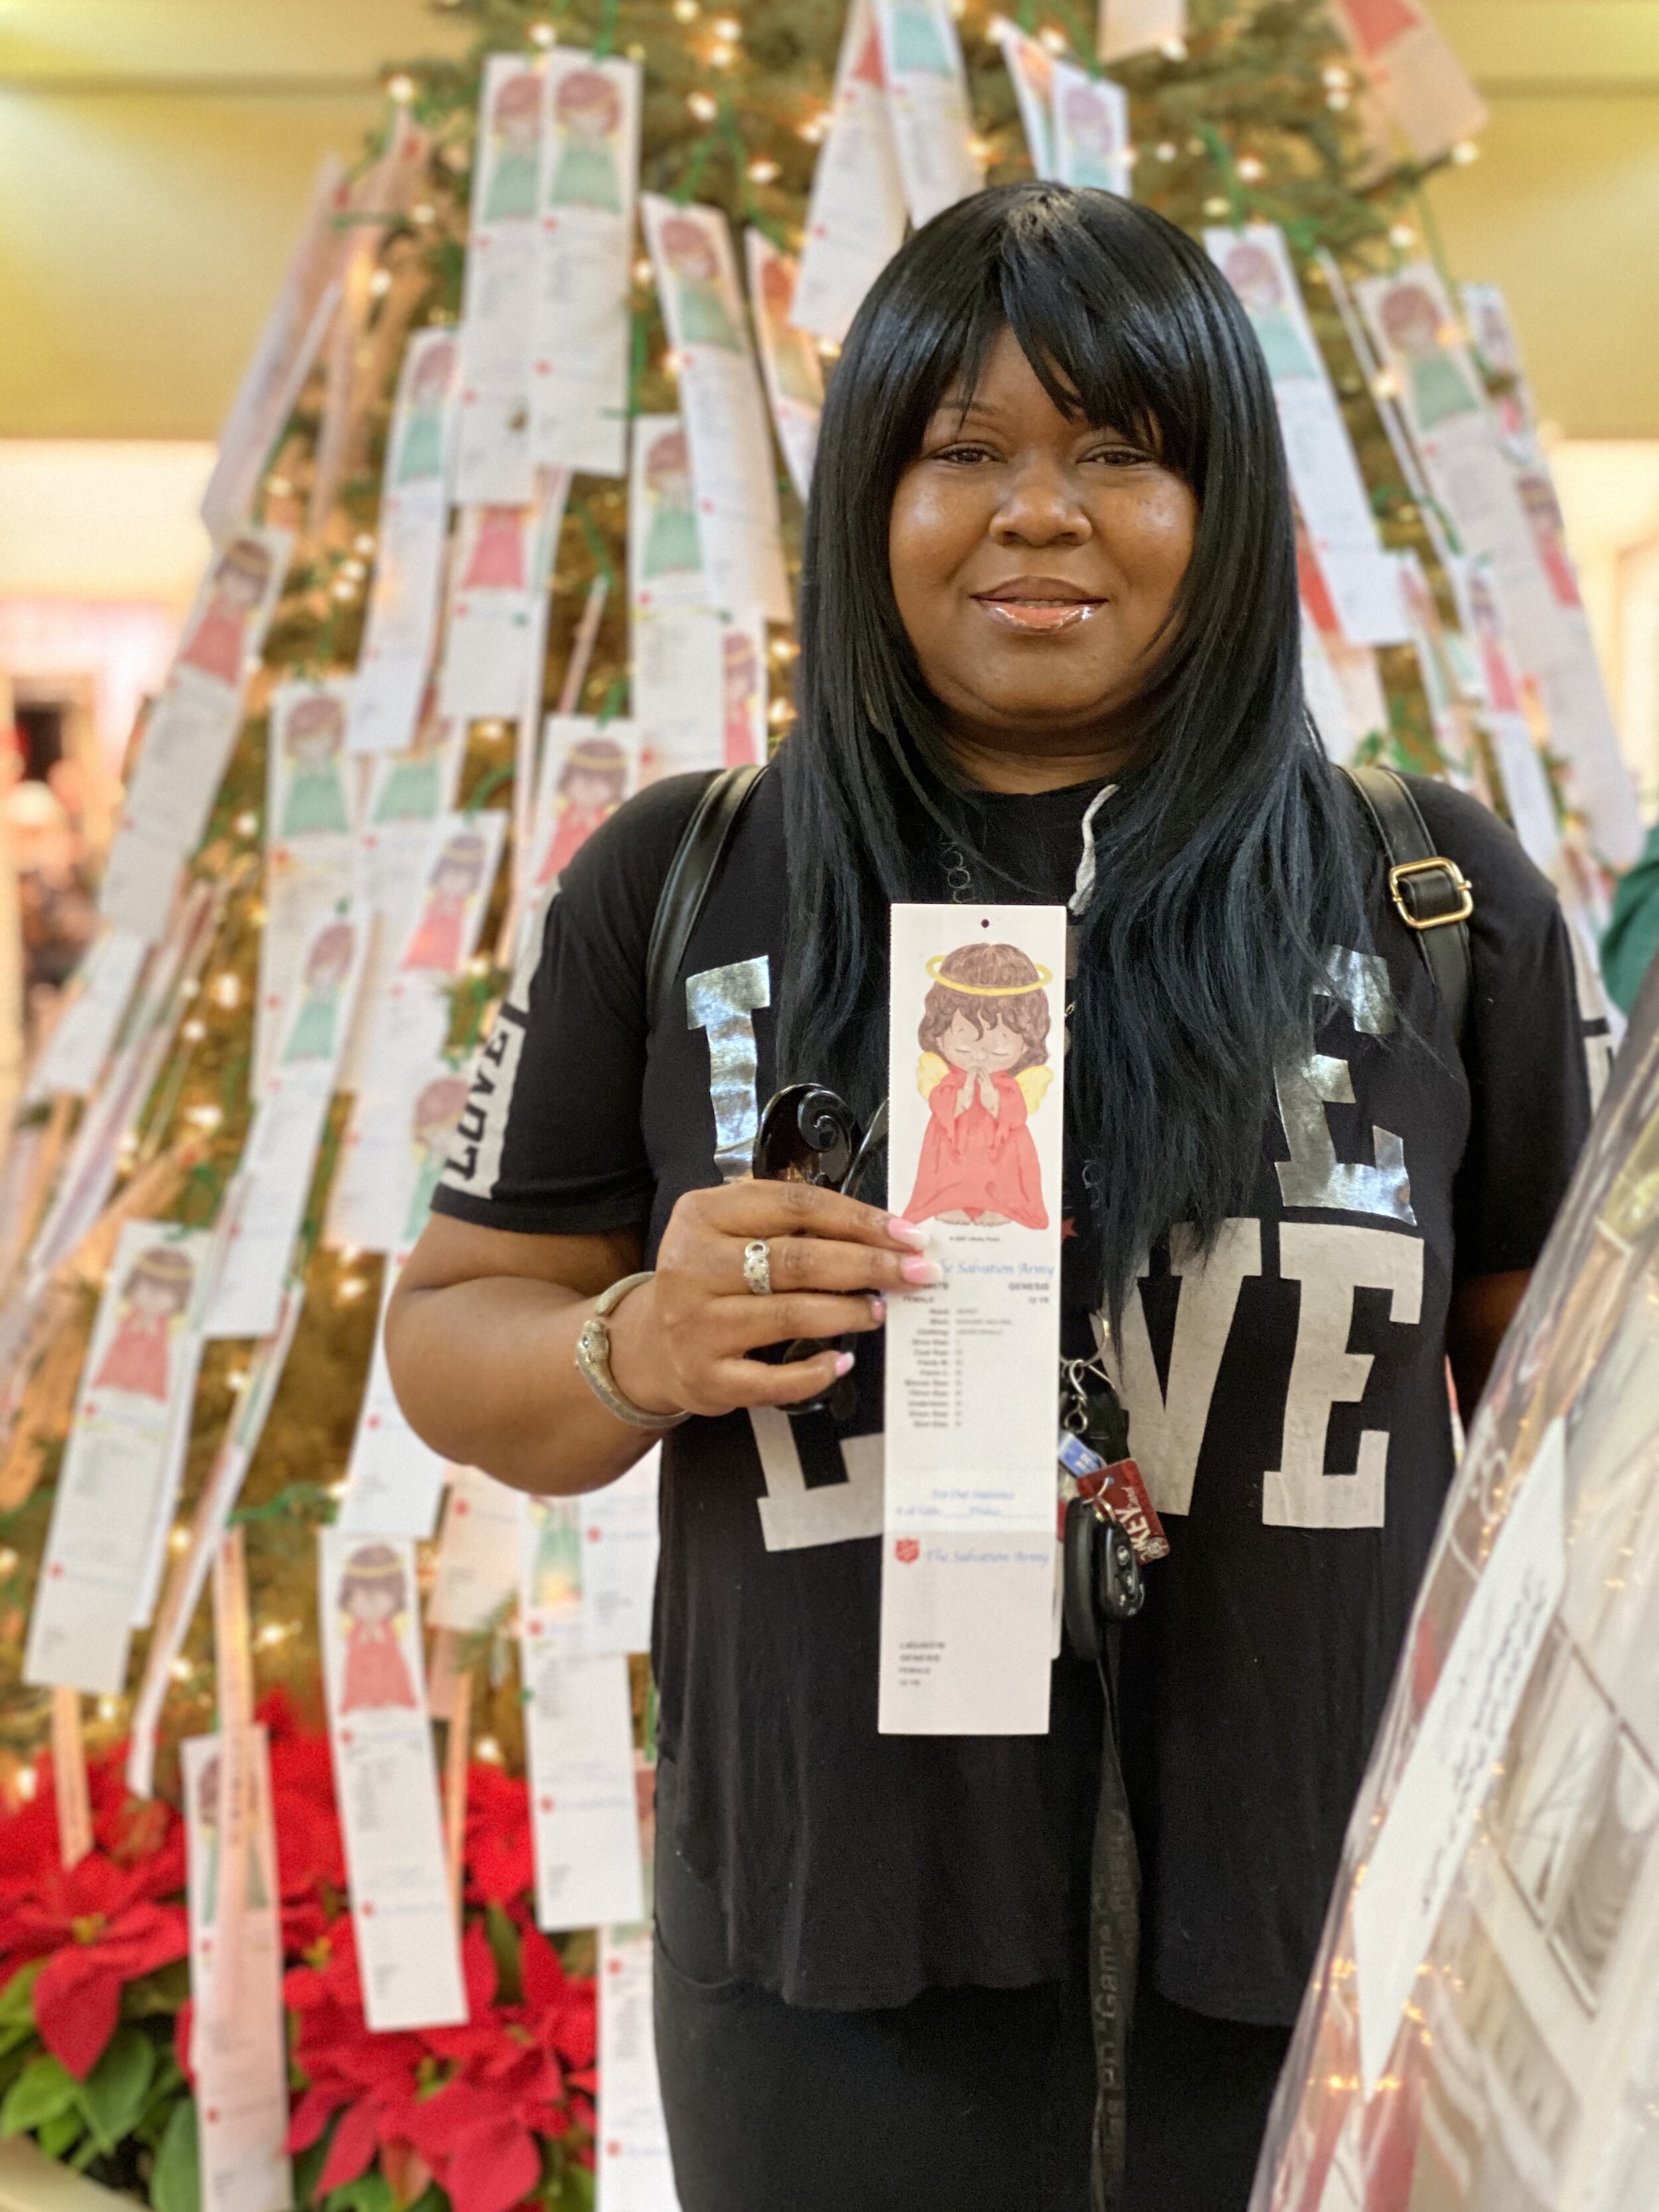  Christening Webb stopped by the Angel Tree four times to adopt kids.  Being a former recipient of the Salvation Army Angel Tree, Christening believes in paying it forward and giving back to the organizations that so generously supported her as a chi